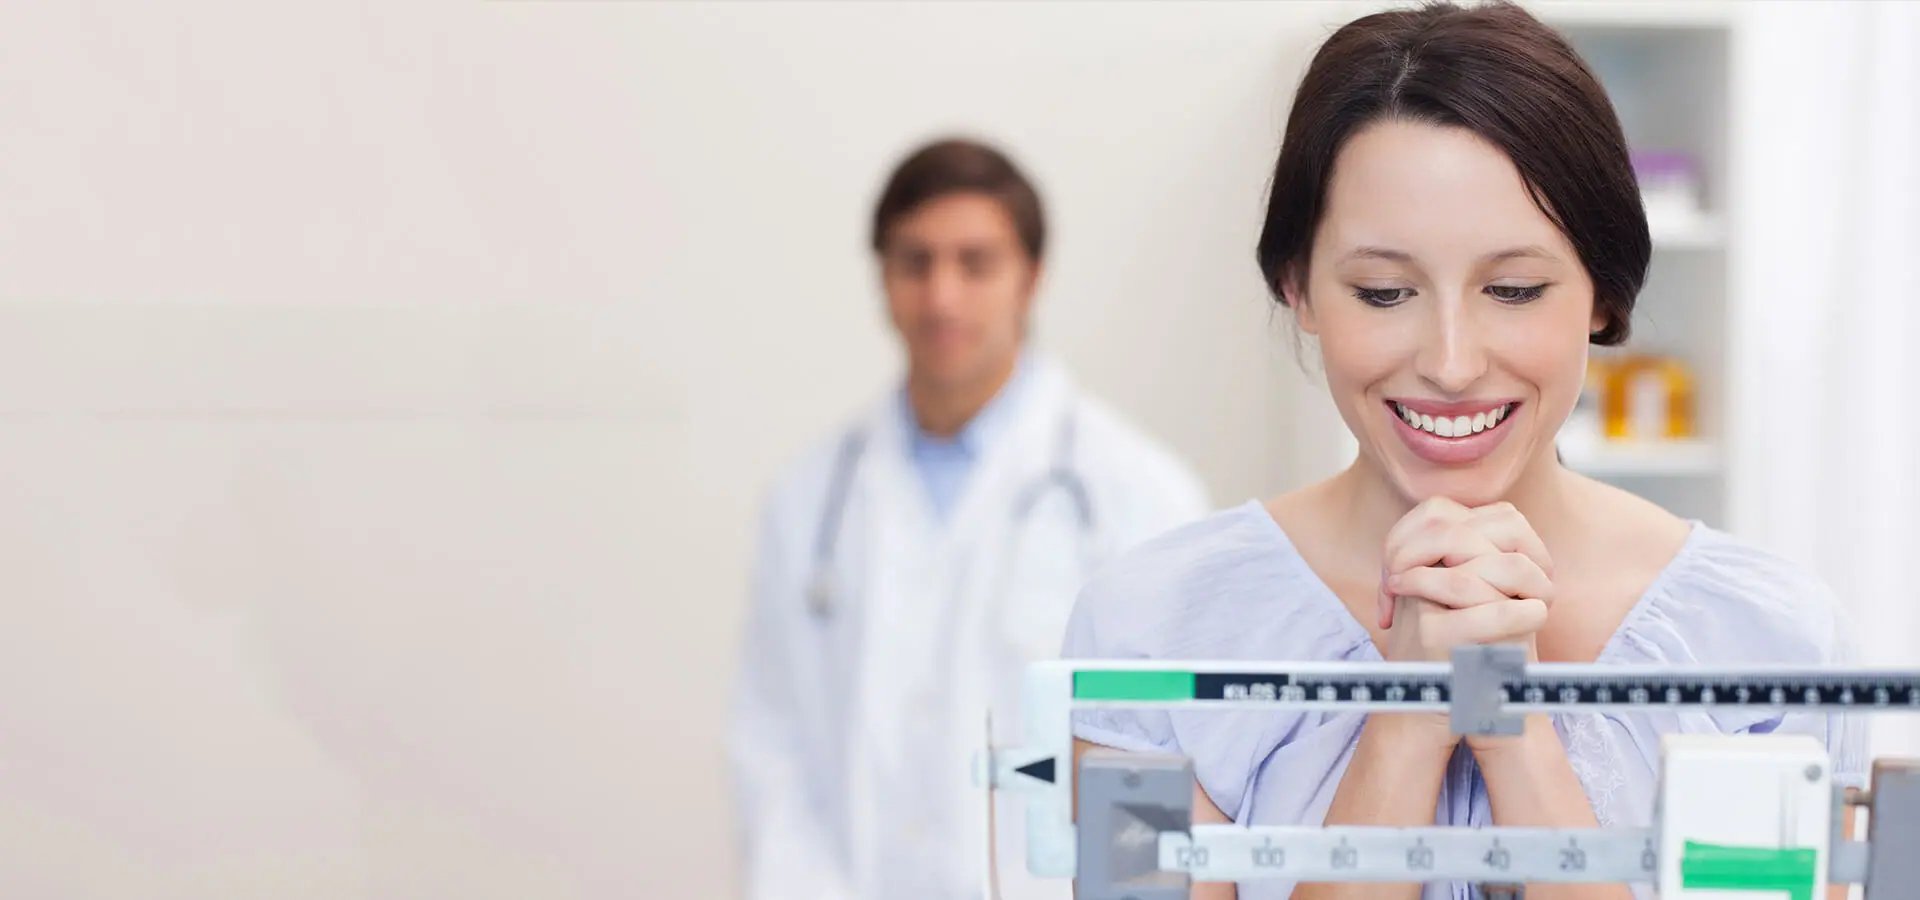 Woman standing on weight scale with doctor in background